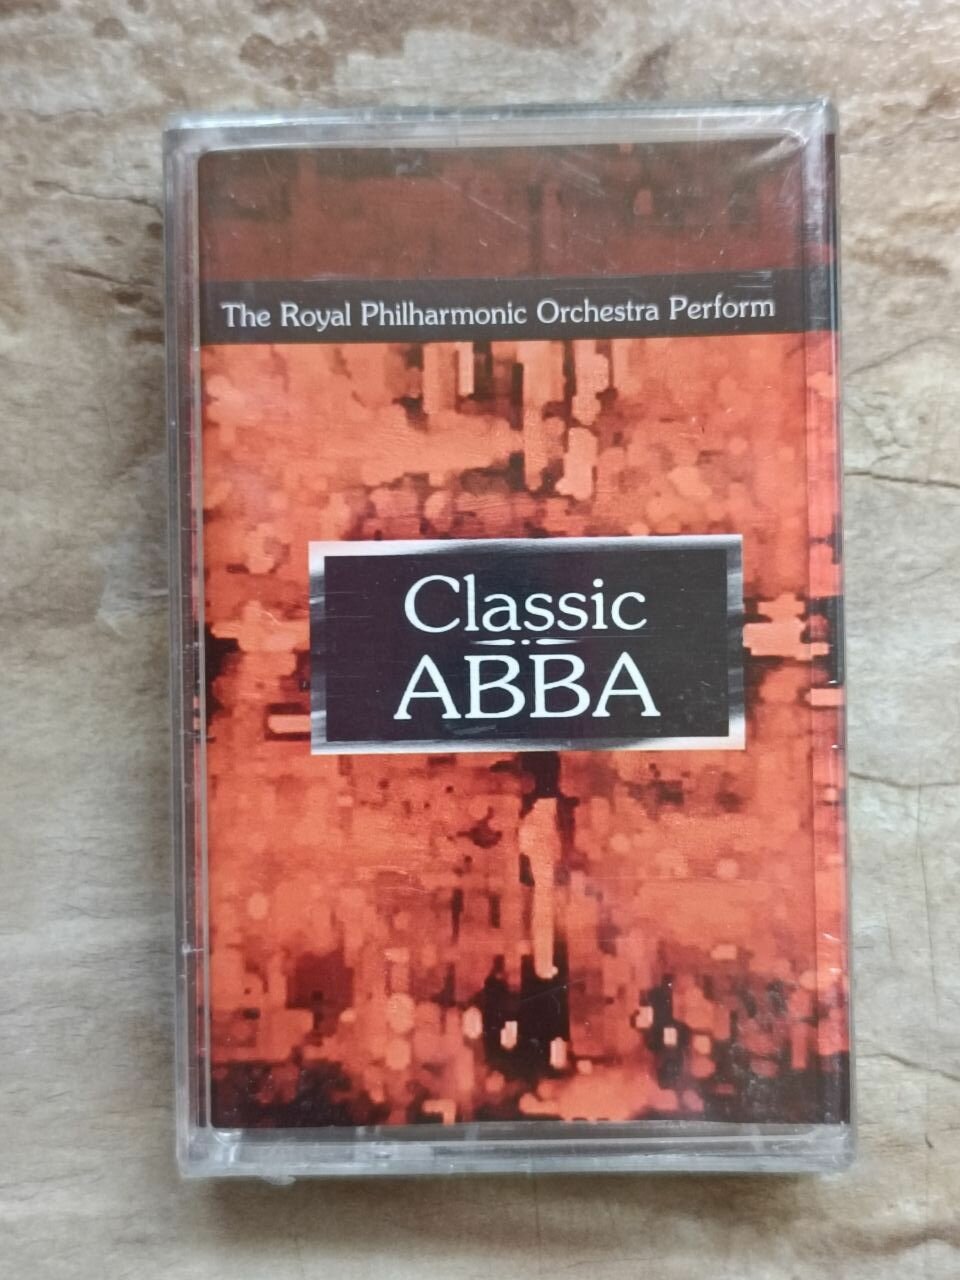 The Royal Philharmonic Orchestra Perform Classic ABBA